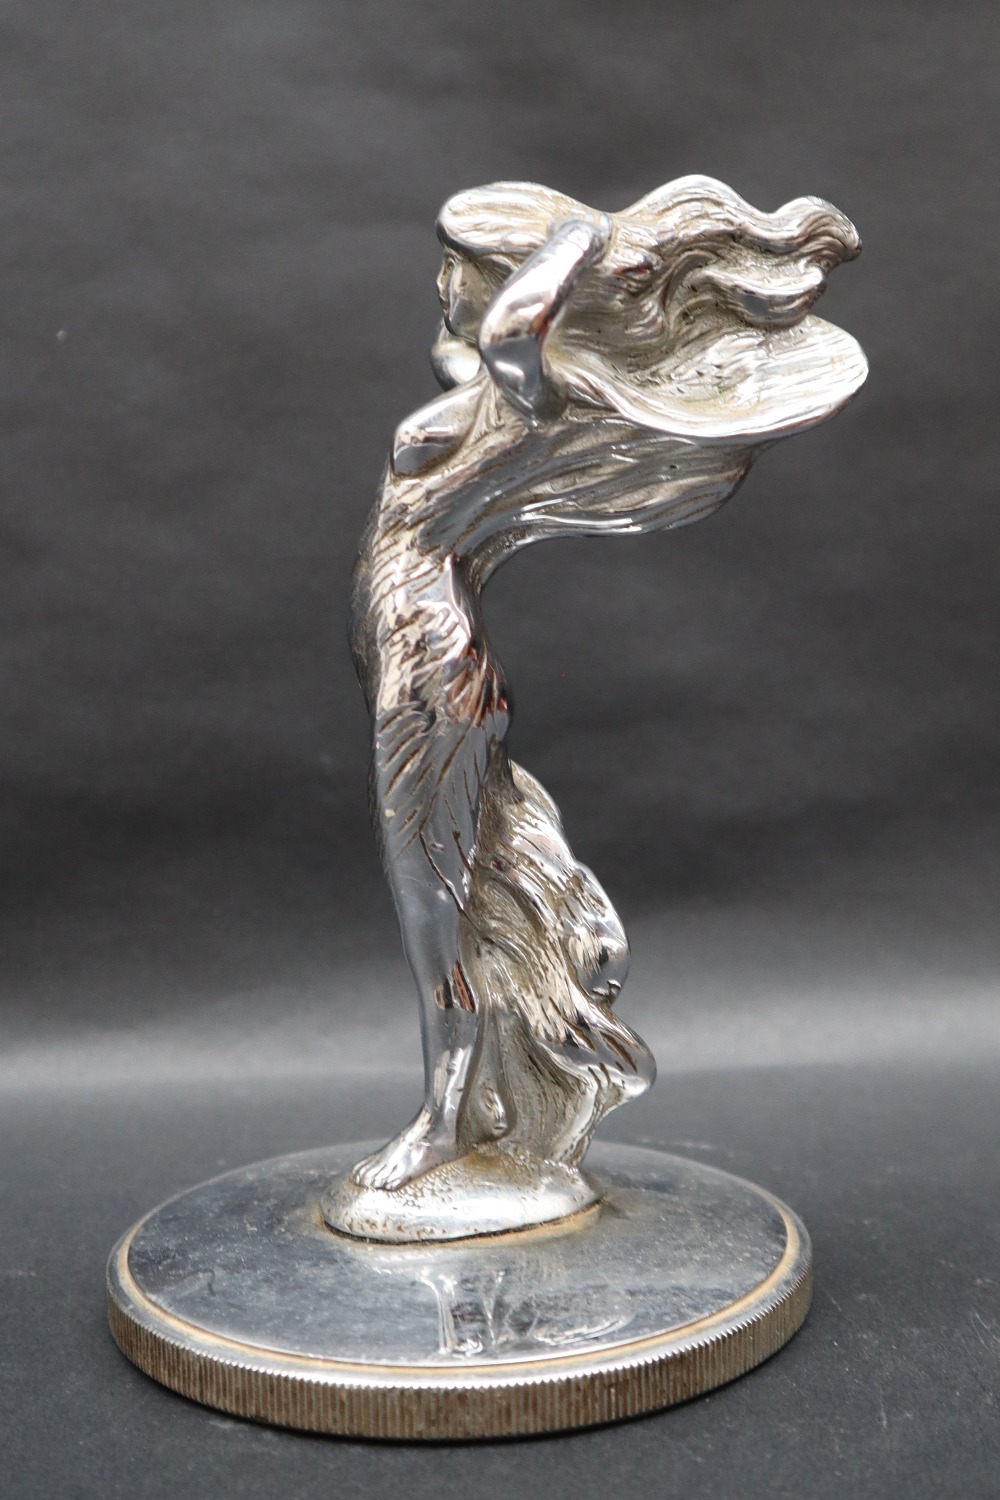 A chrome car / truck mascot of a maiden with flowing hair and arms raised, - Image 2 of 6